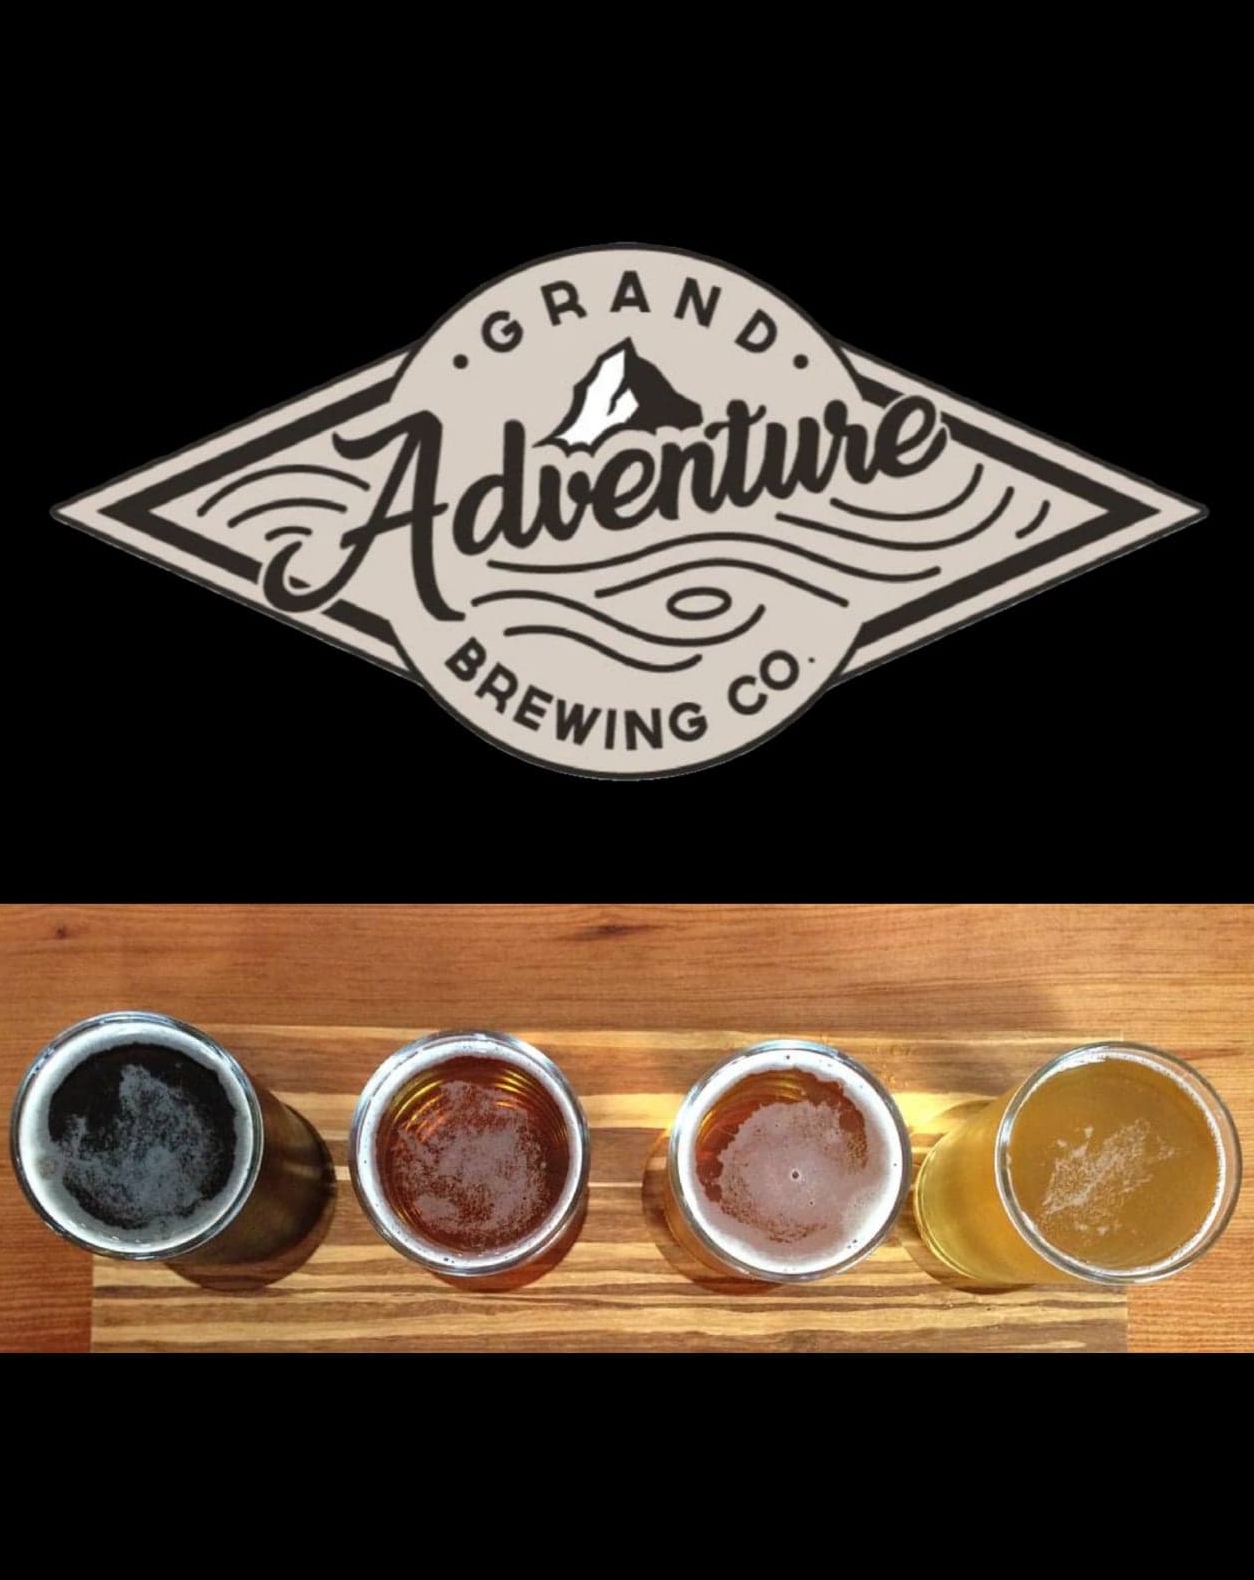 have you tried all the beer s at grand adventure brewing